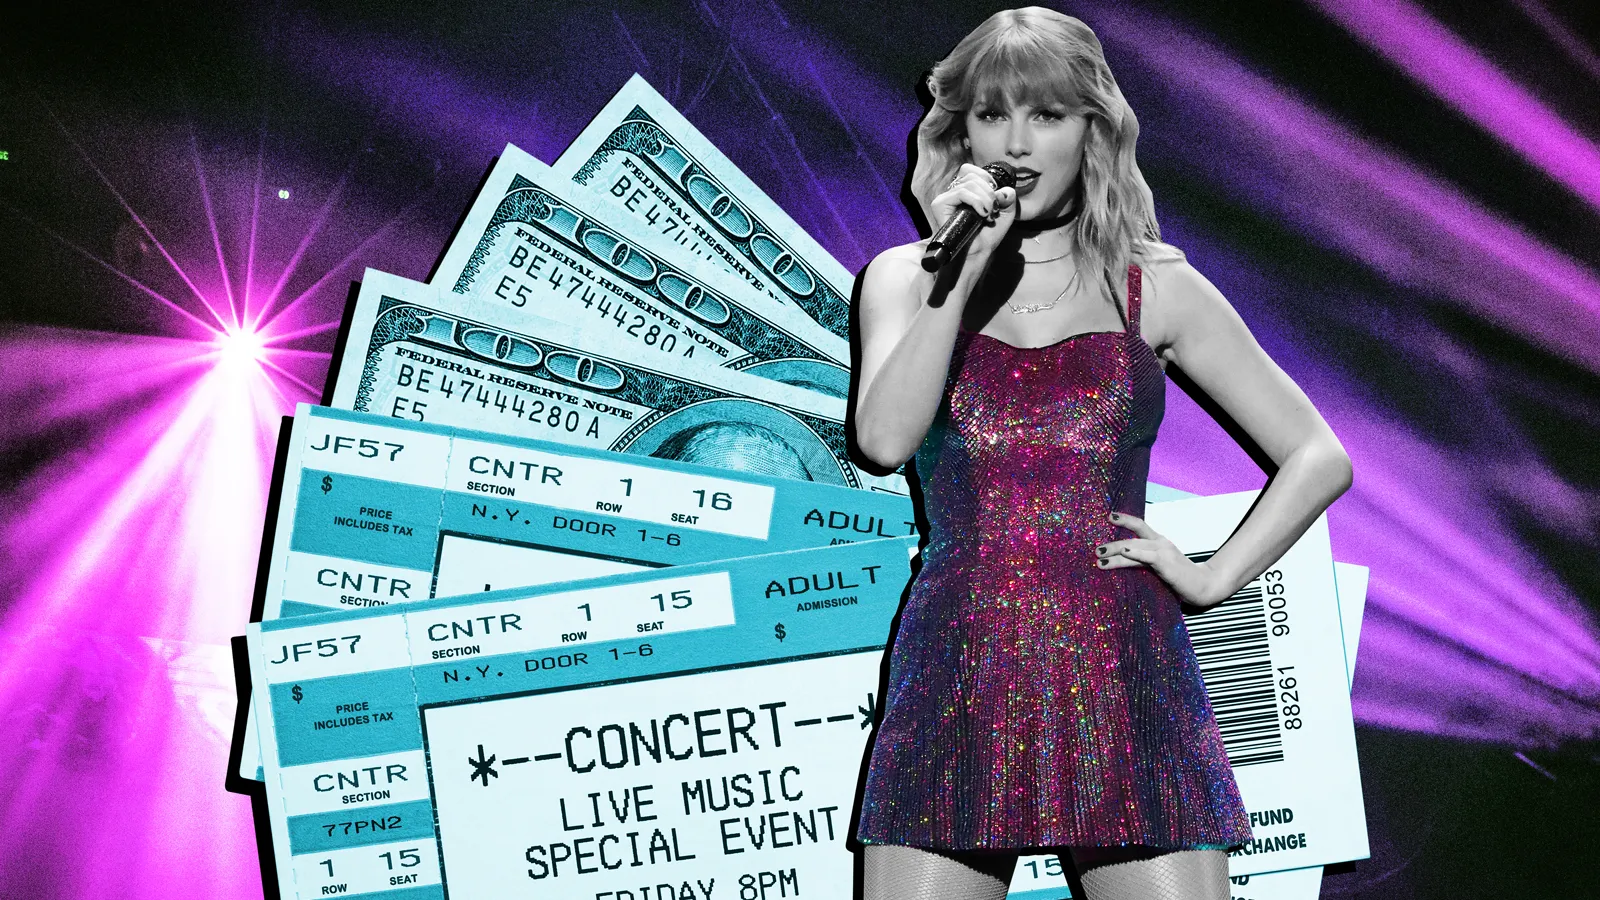 5 Brand Experience Tips to Learn From Taylor Swift